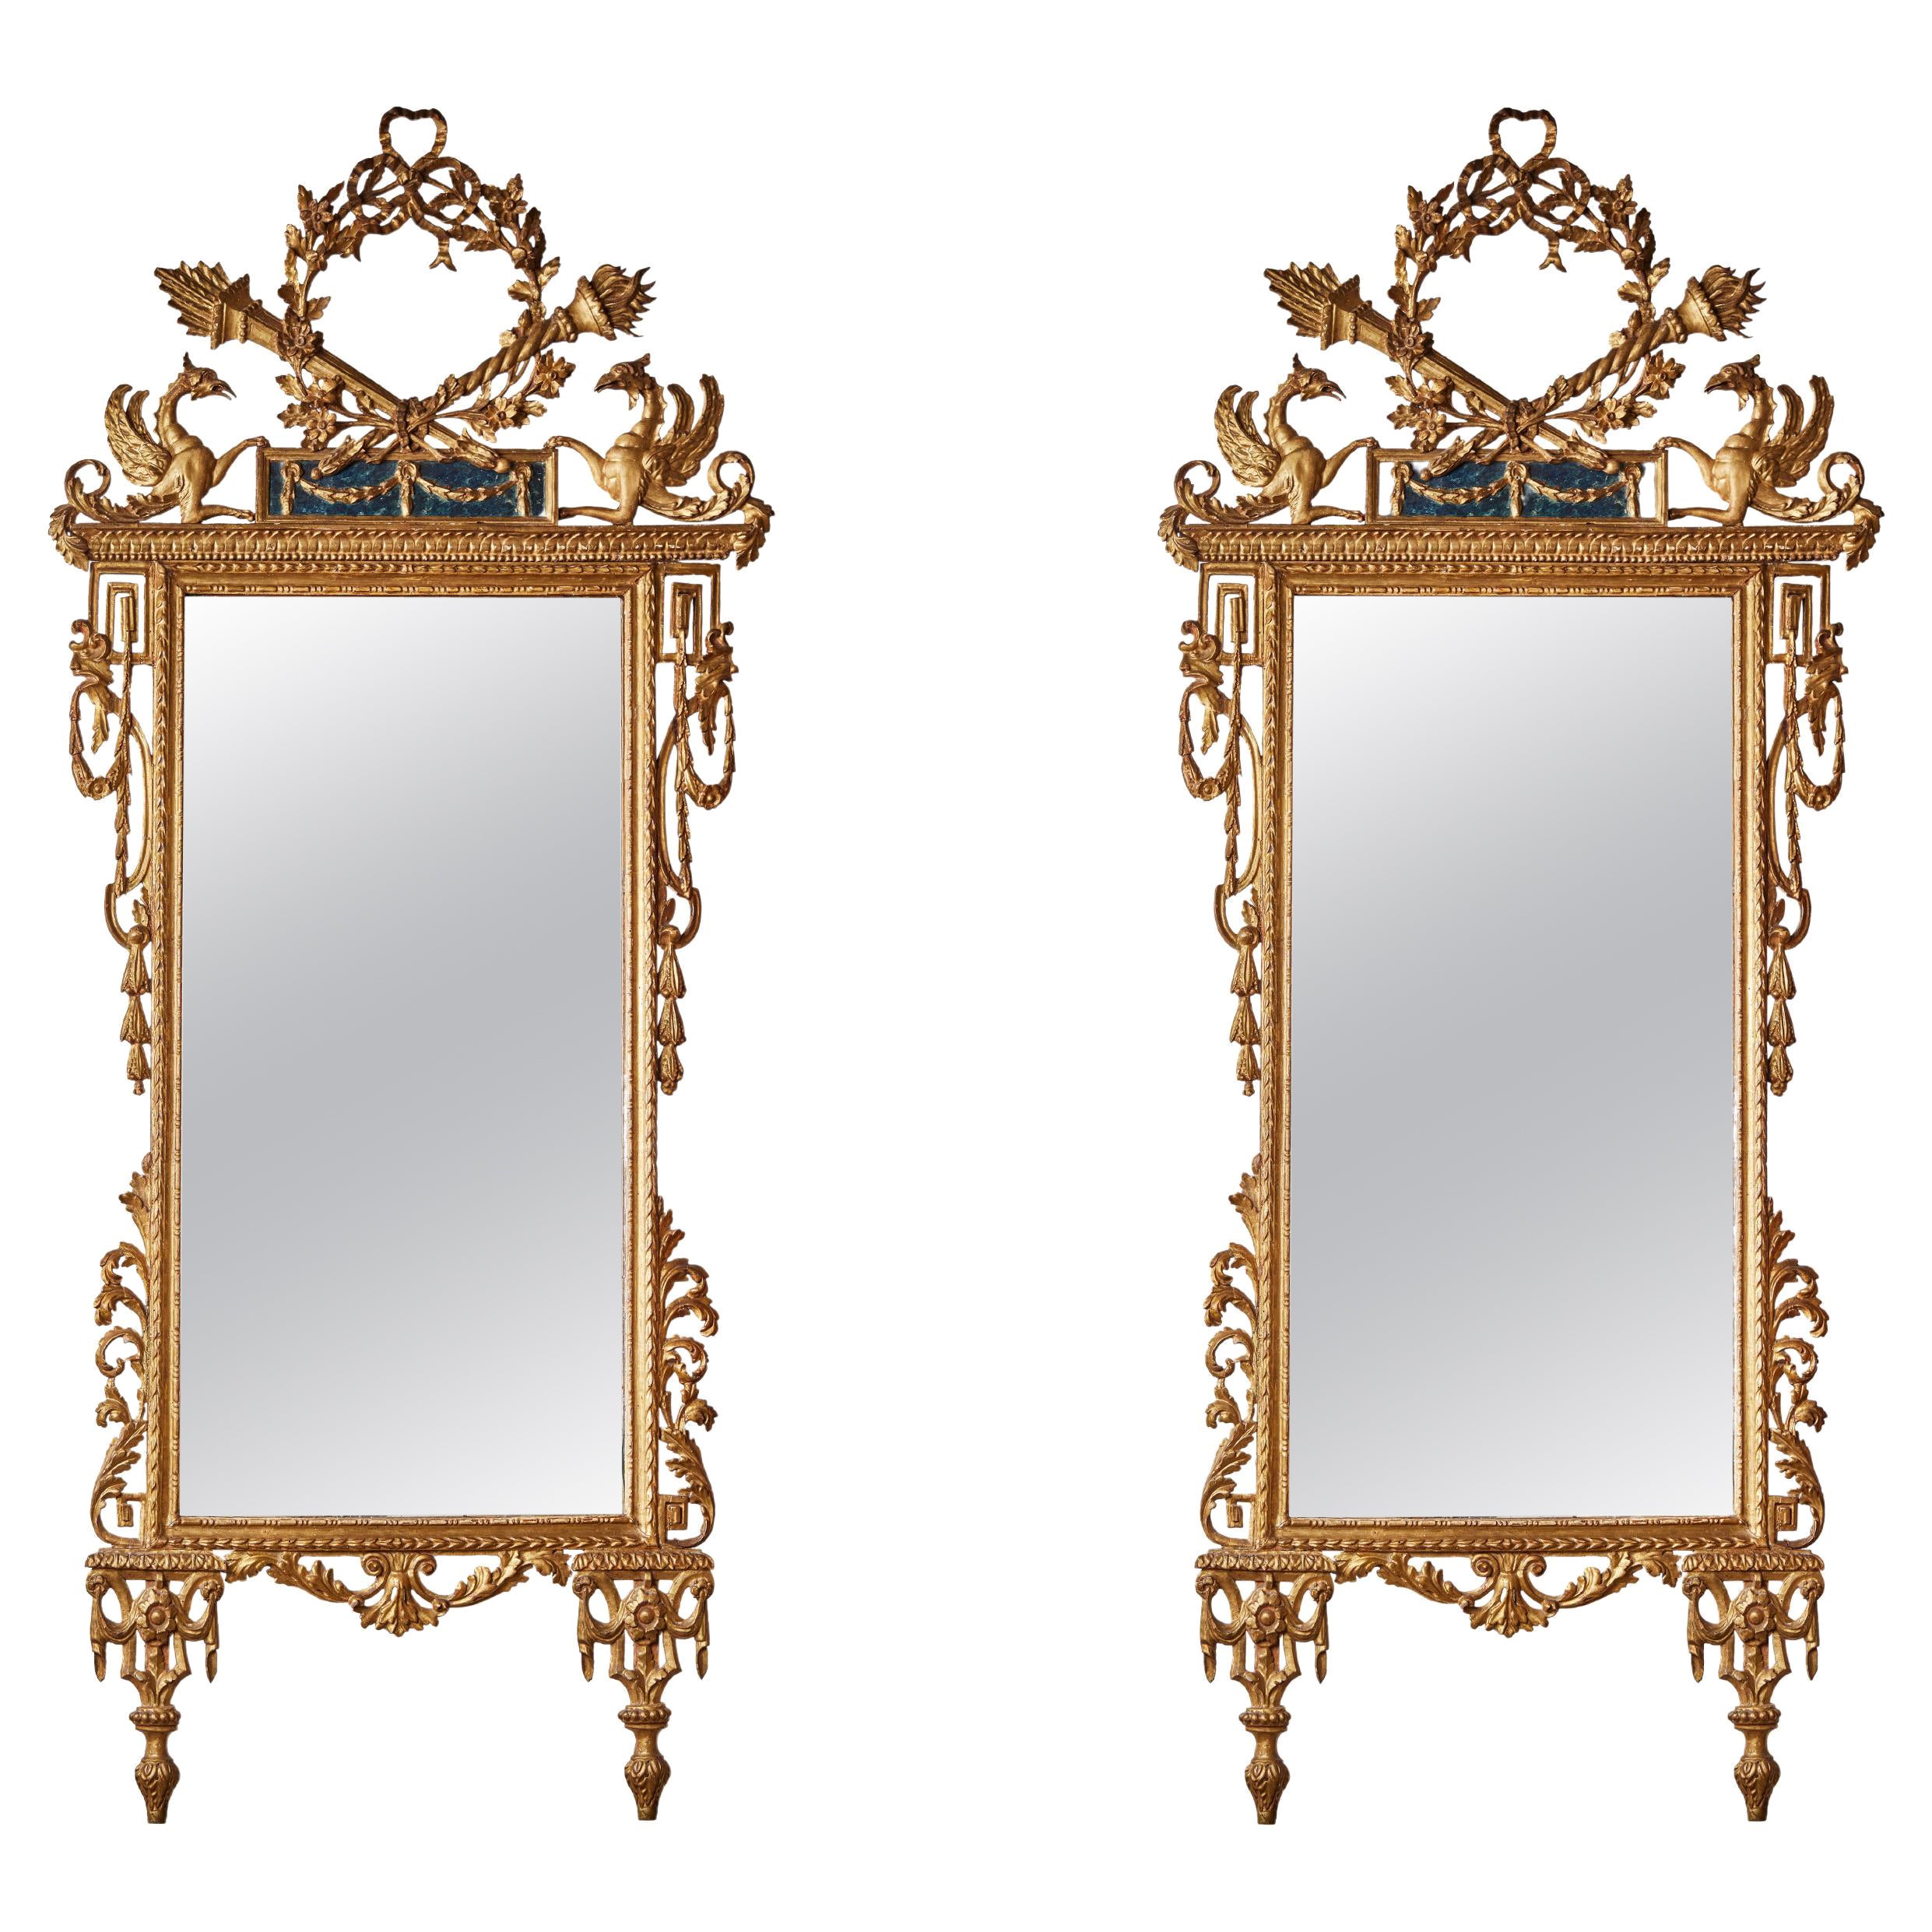 Neoclassical Pier Mirrors For Sale